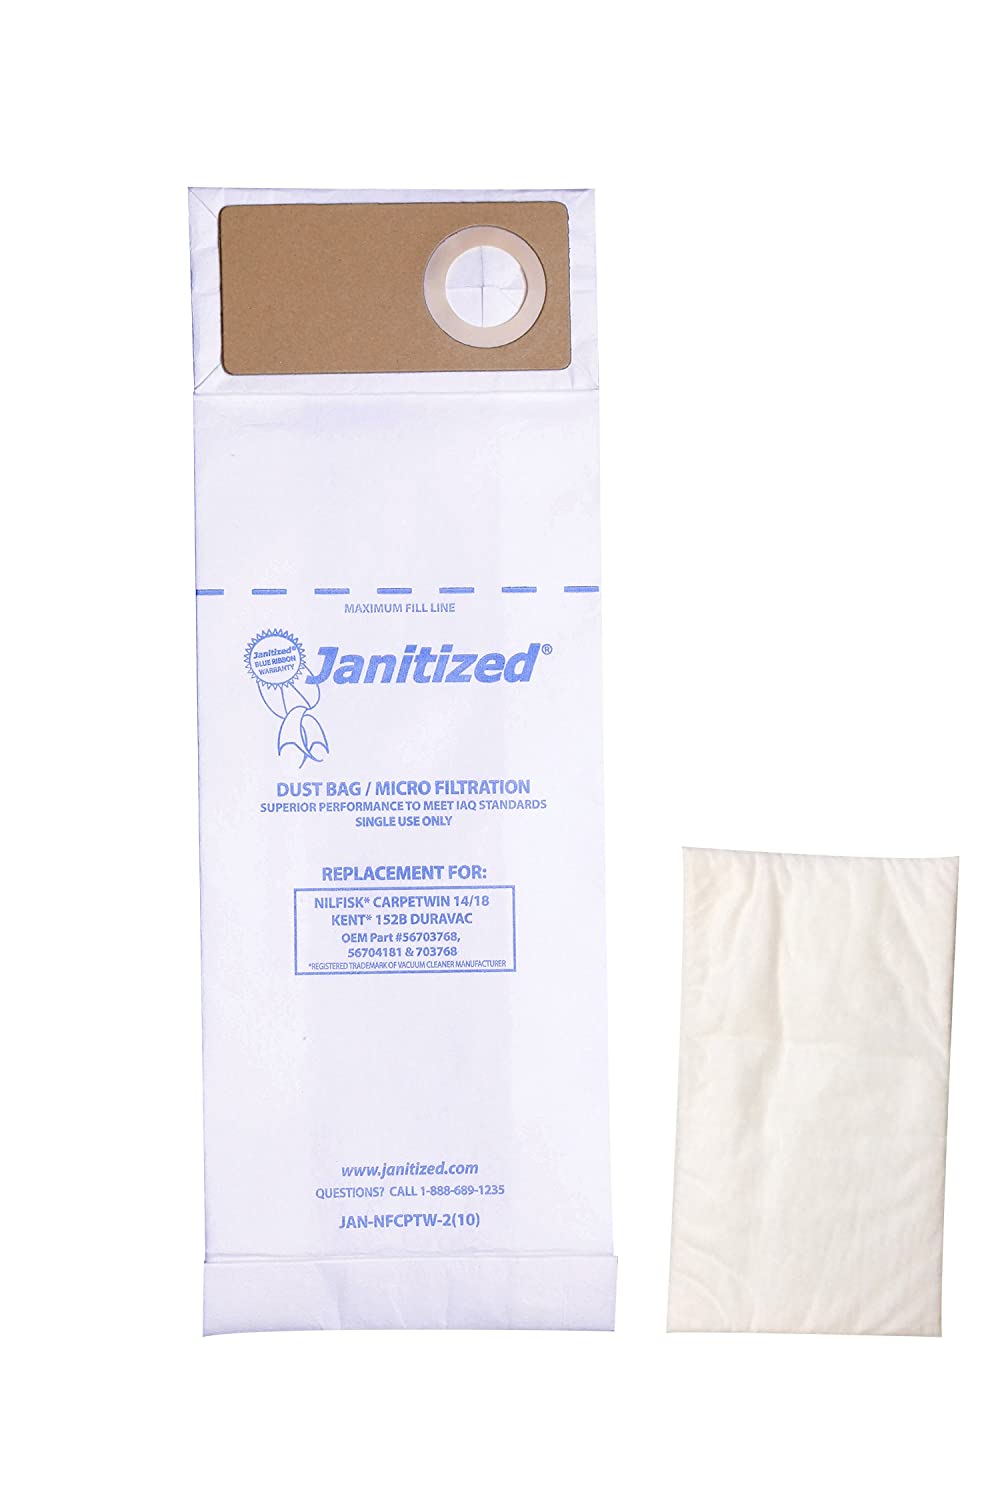 Janitized JAN-NFCPTW-2(10) Premium Replacement Commercial Vacuum Paper Bag, Nilfisk Advance CarpeTwin Upright 14/18, Advac and Kent 152B, DuraVac, OEM# 56703768, 56704181 and 703768 (Pack of 10)